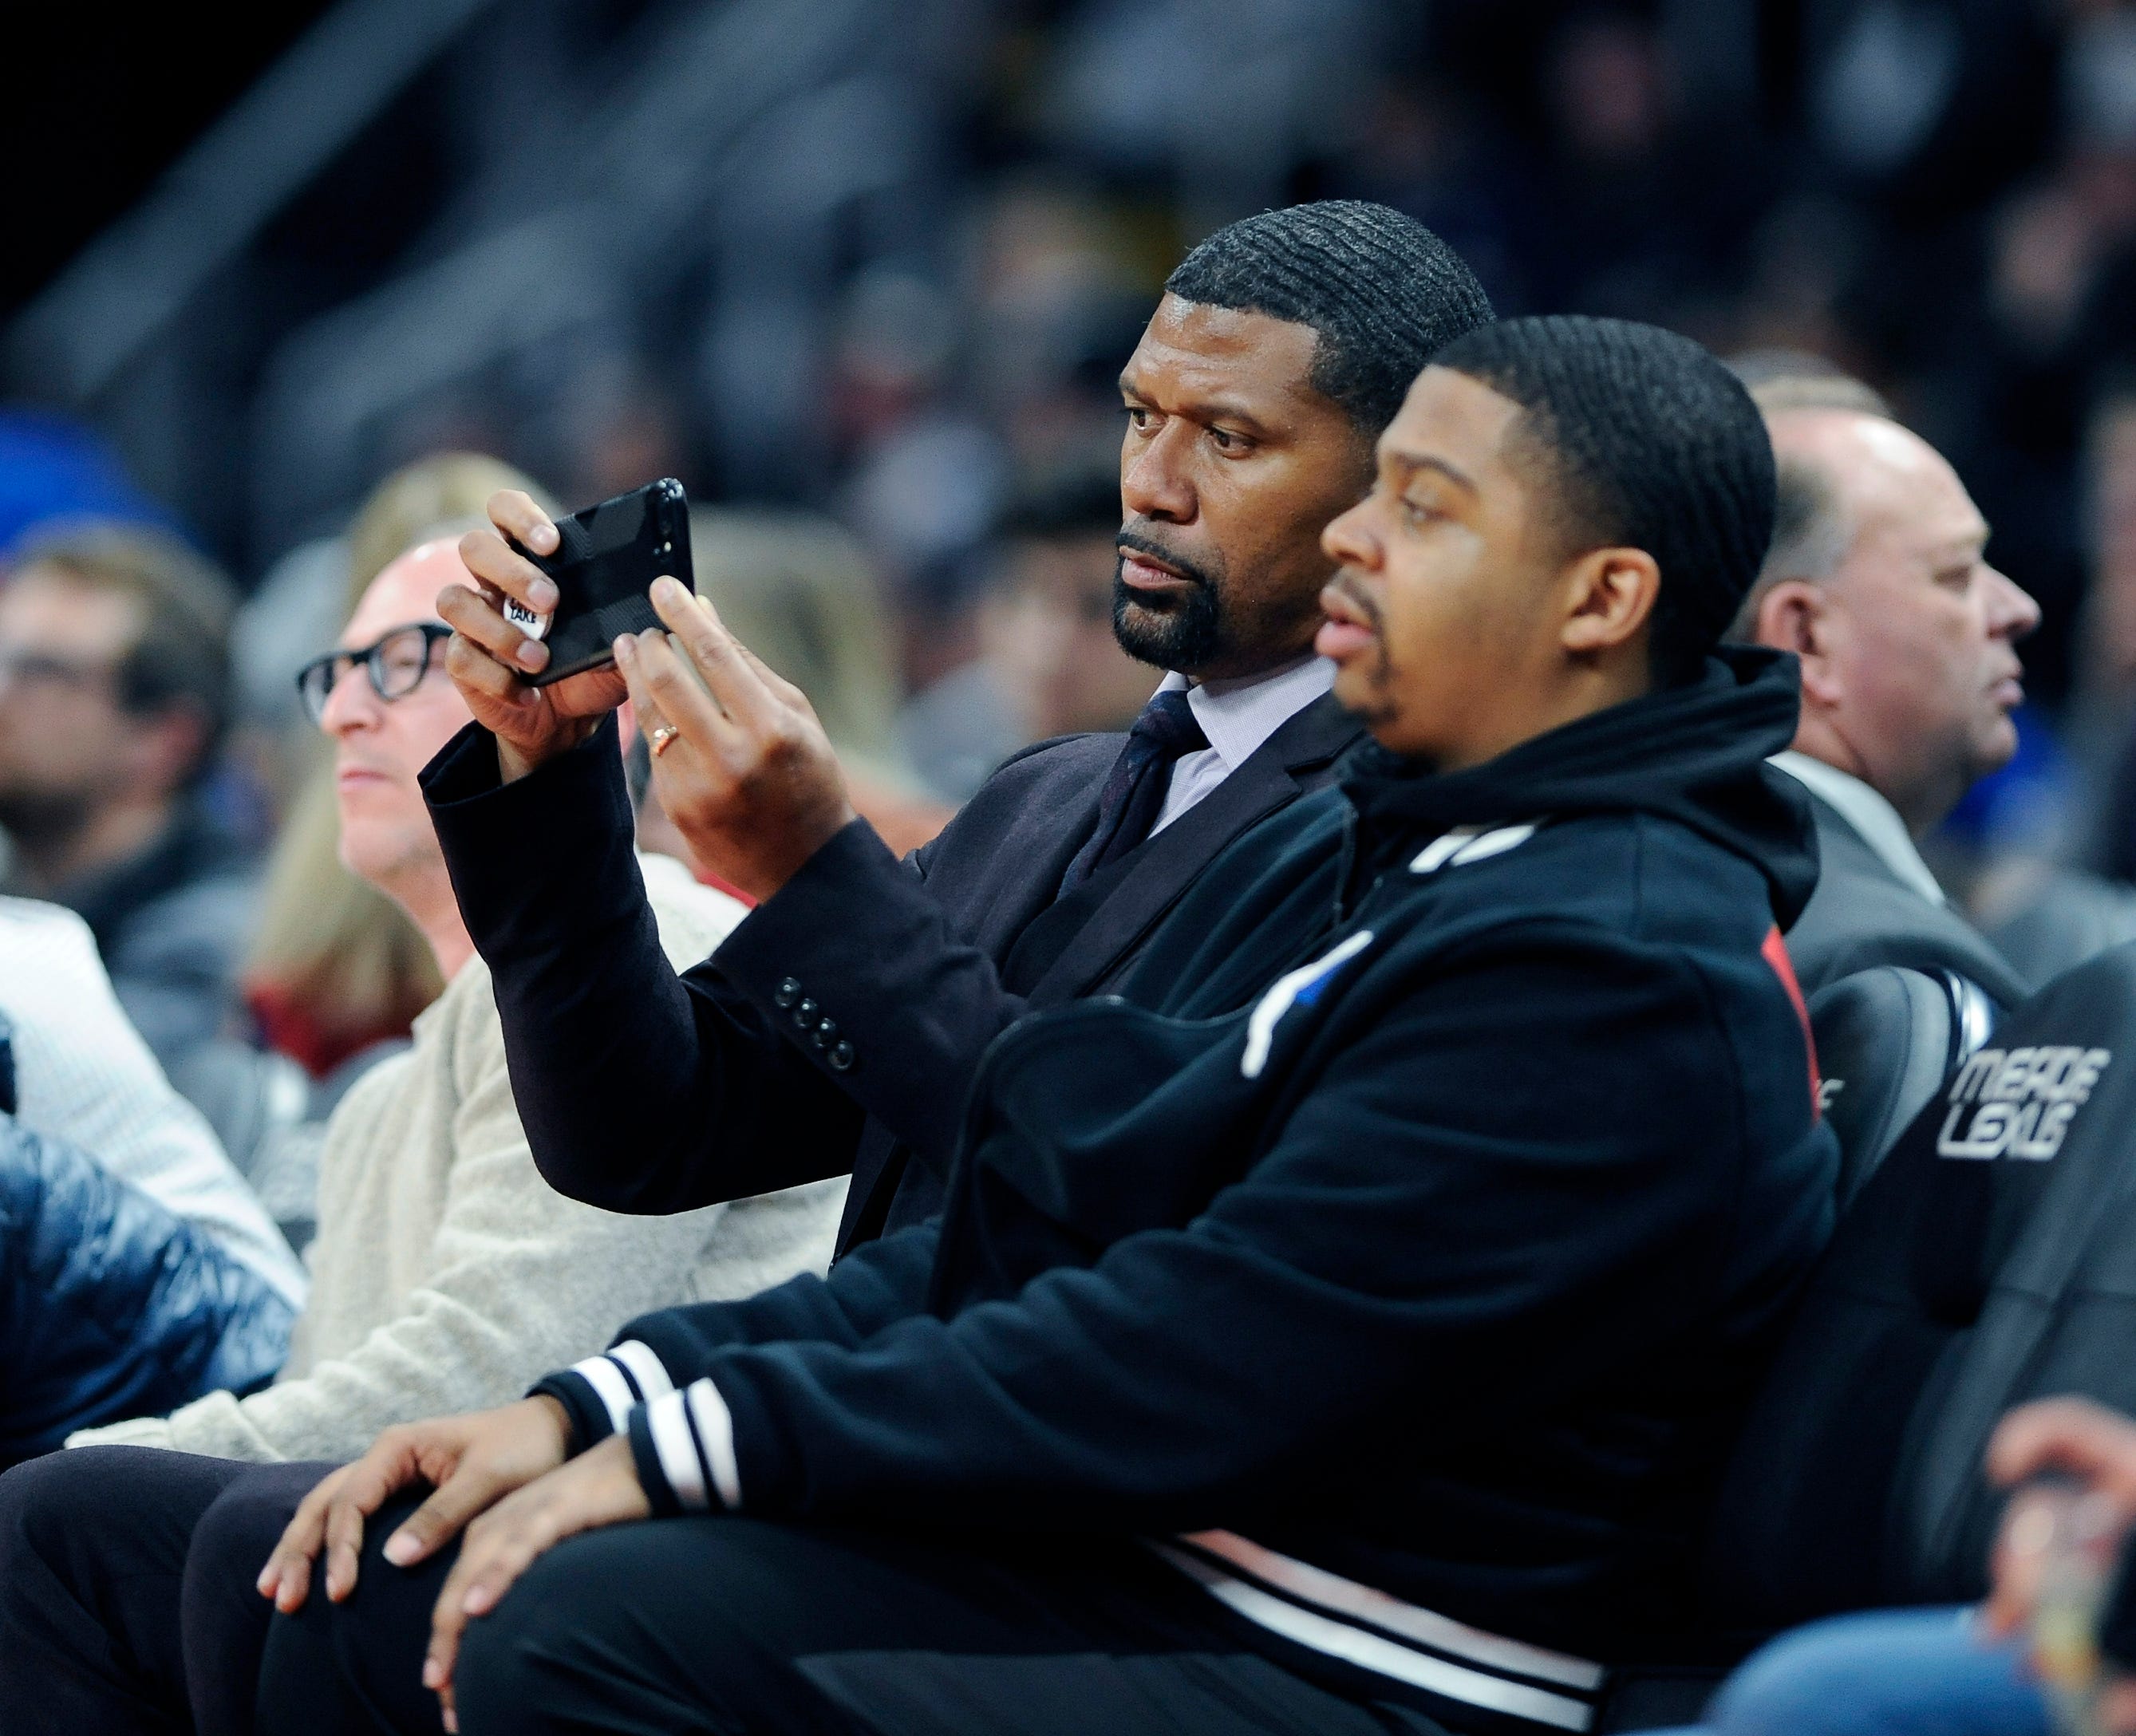 Jalen Rose, right, with a phone, takes photos of the action in the second quarter.